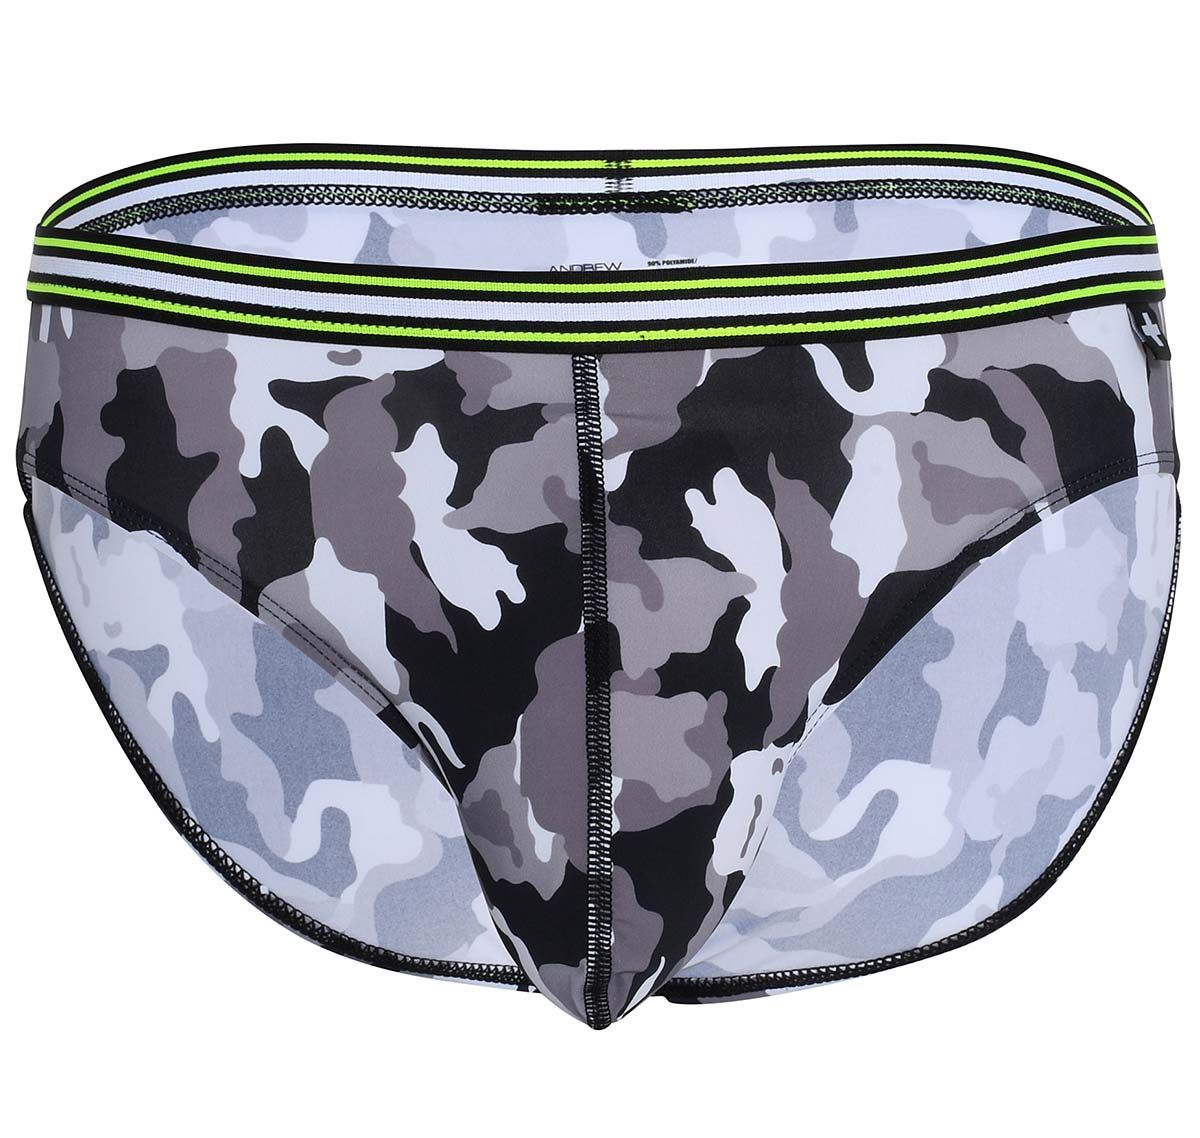 Andrew Christian Pack of 3 Briefs CAMO BOY BRIEF 3-PACK 92260, multicolor